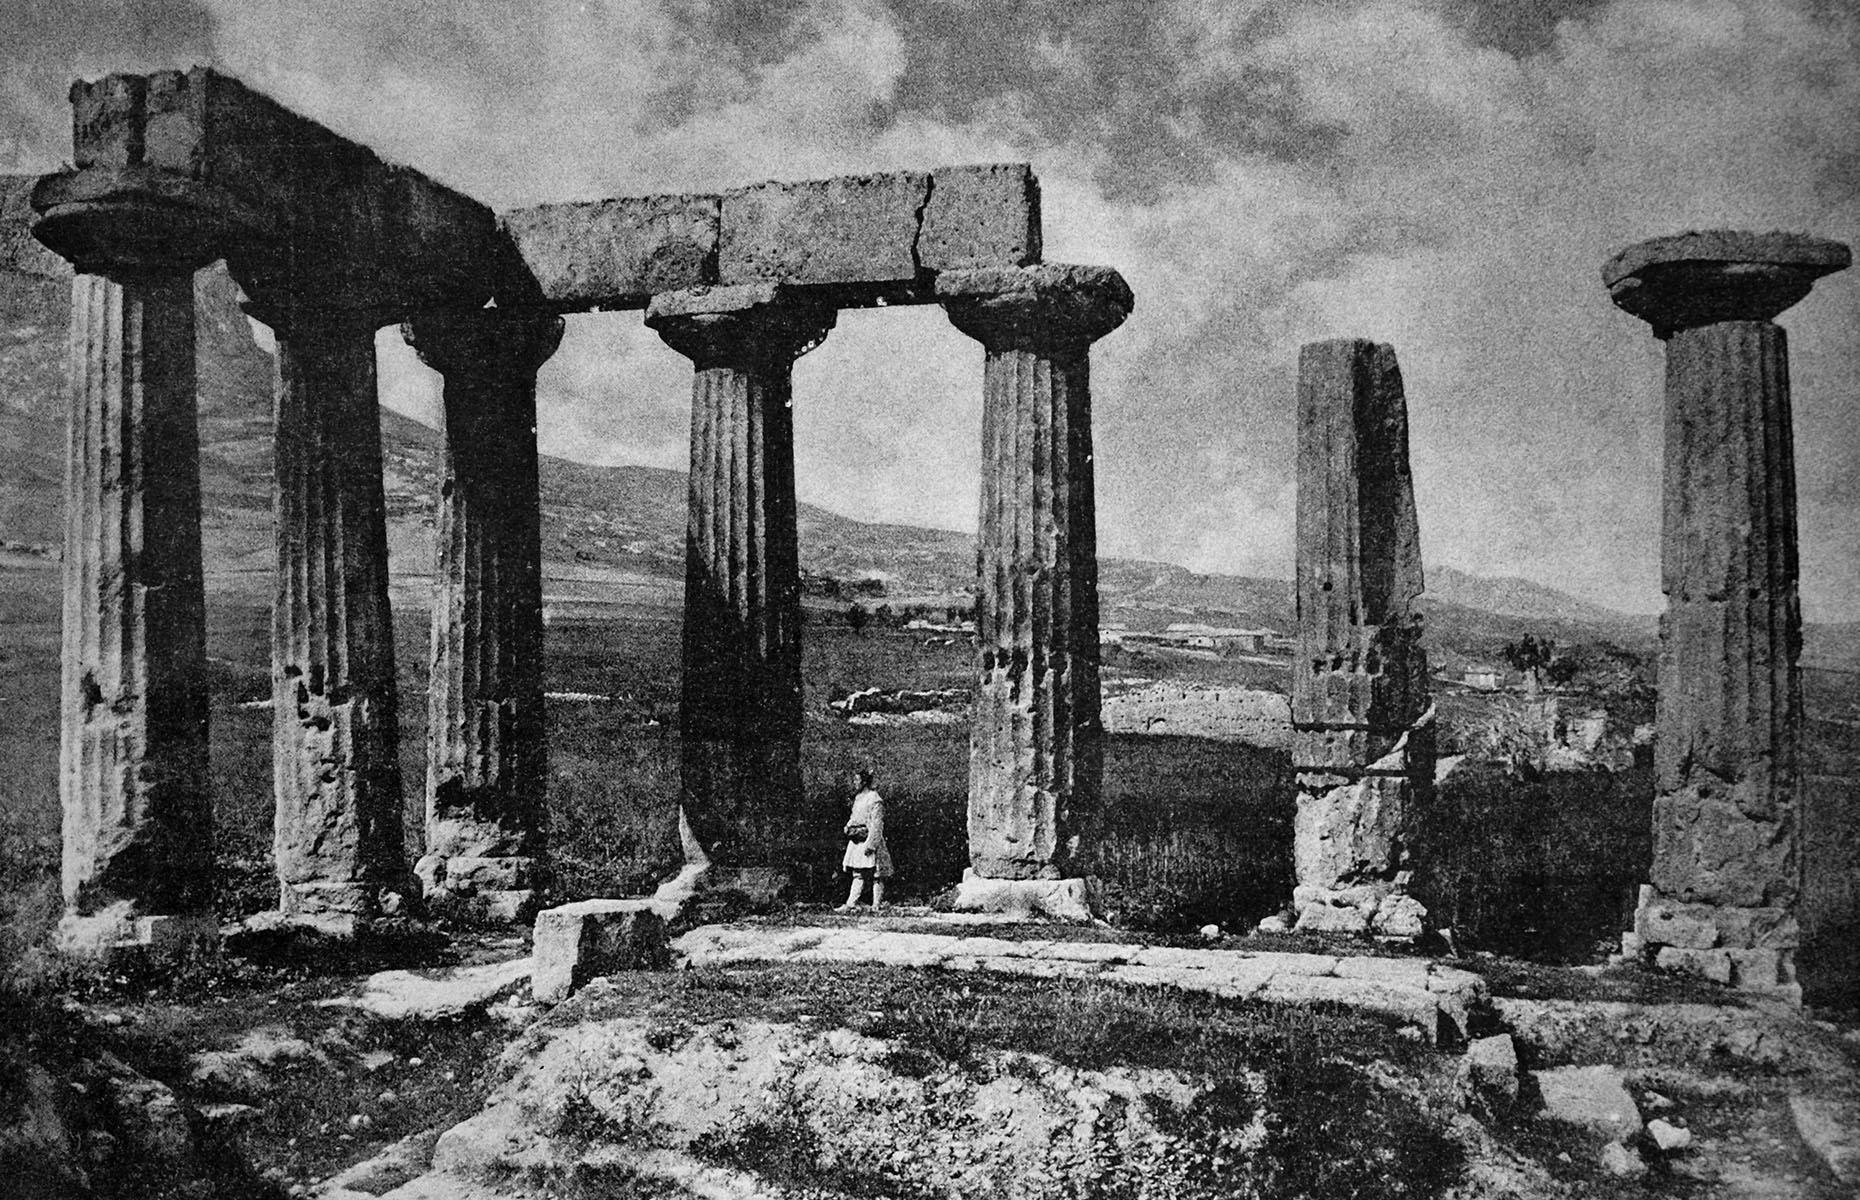 <p>This photo of a lone visitor at the Temple of Apollo in Corinth, in the Peloponnese region of Greece, is truly evocative of a time past. It was taken in 1884, 12 years before excavations on the site of the ancient Greek city of Corinth began, led by a group of American archaeologists based in Athens. They revealed the remains of other temples, villas, a theater, shops, public baths, pottery factories, a gymnasium, and a large triumphal arch, confirming the city’s importance in the ancient world.</p>